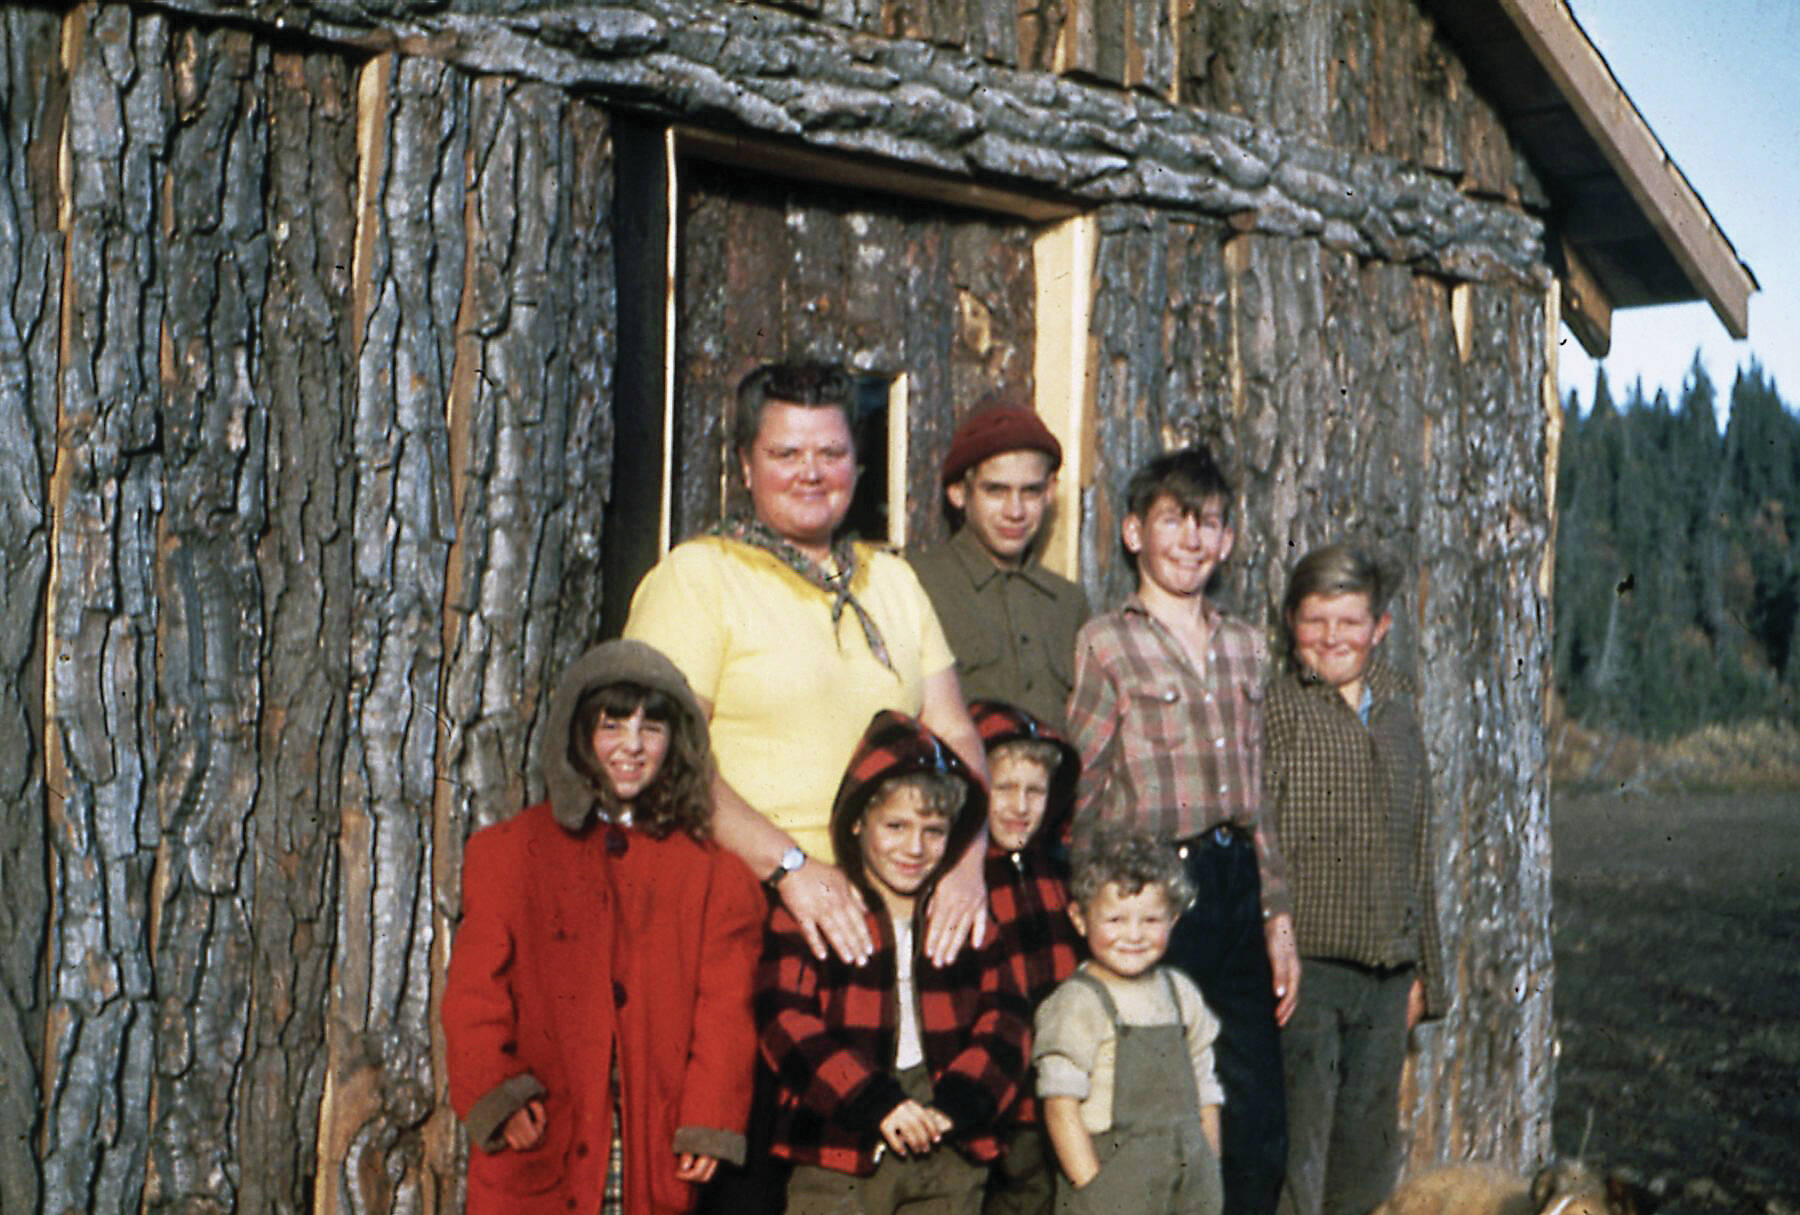 This cottonwood-log structure was Anchor Point’s first-ever school, located on the south side of the Anchor River. It was replaced with a better school on the north side, on property donated by Sherman and Louvie Chapman. Seen here are the first teacher, Helen Smith, and some of her students, including Larry Keeler standing next to Smith. Louvie “Vi” Chapman photo courtesy of the Pratt Museum.